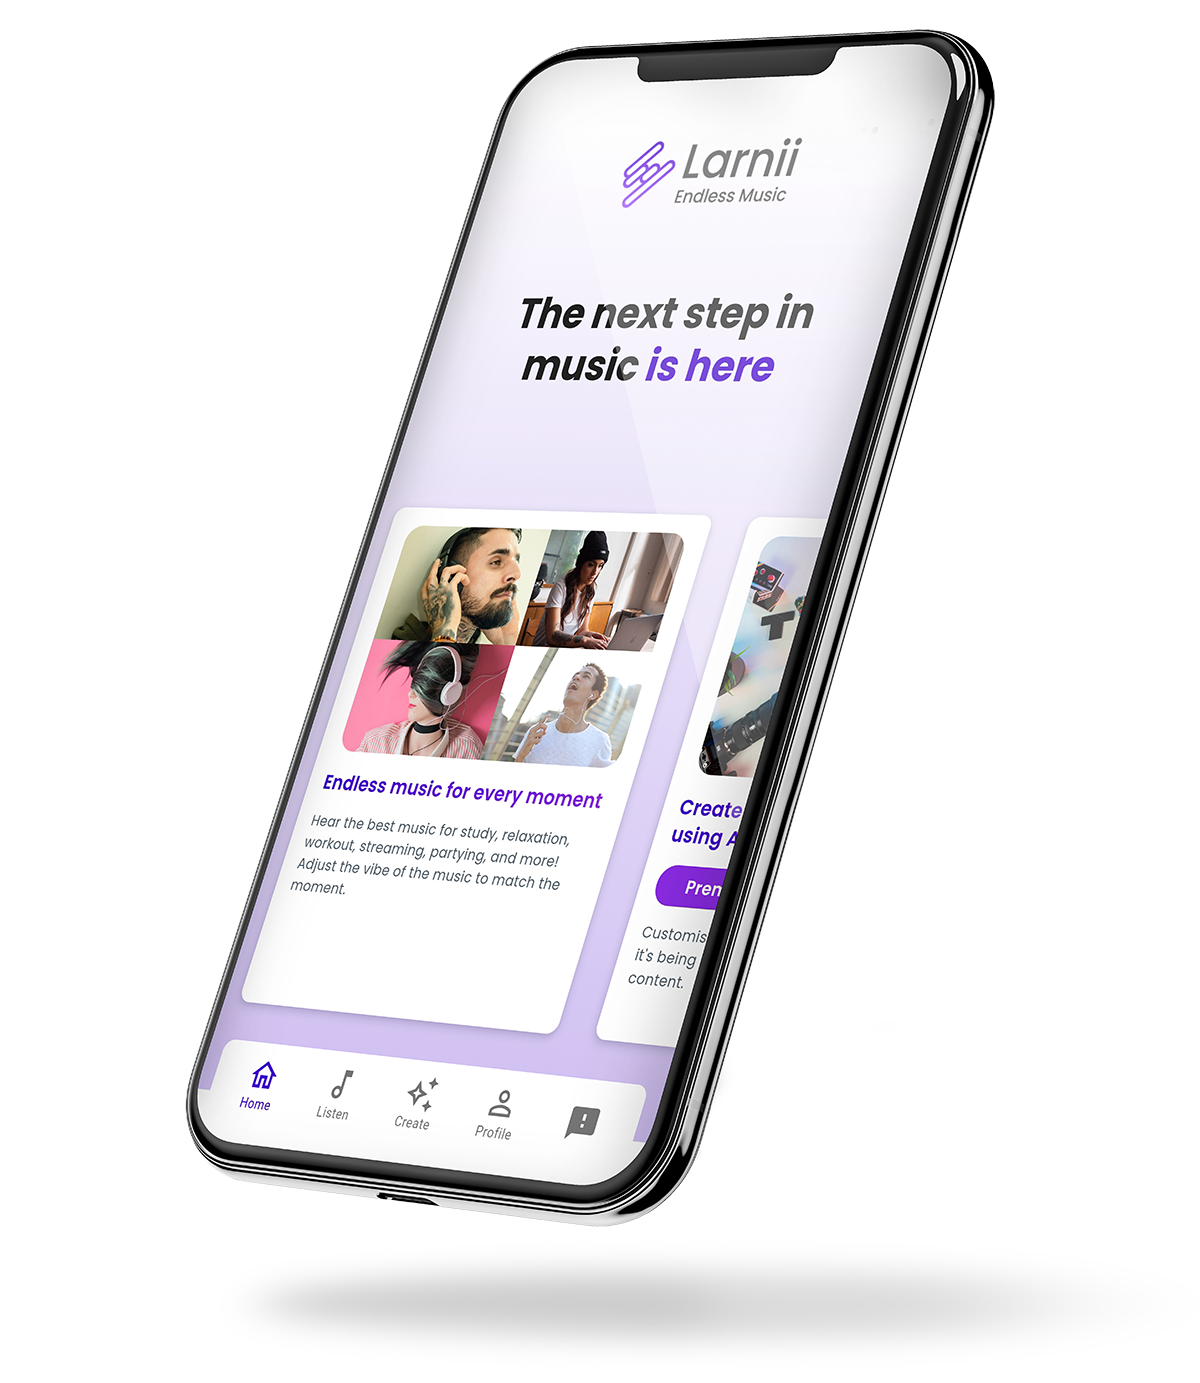 Download the free Larnii streaming app